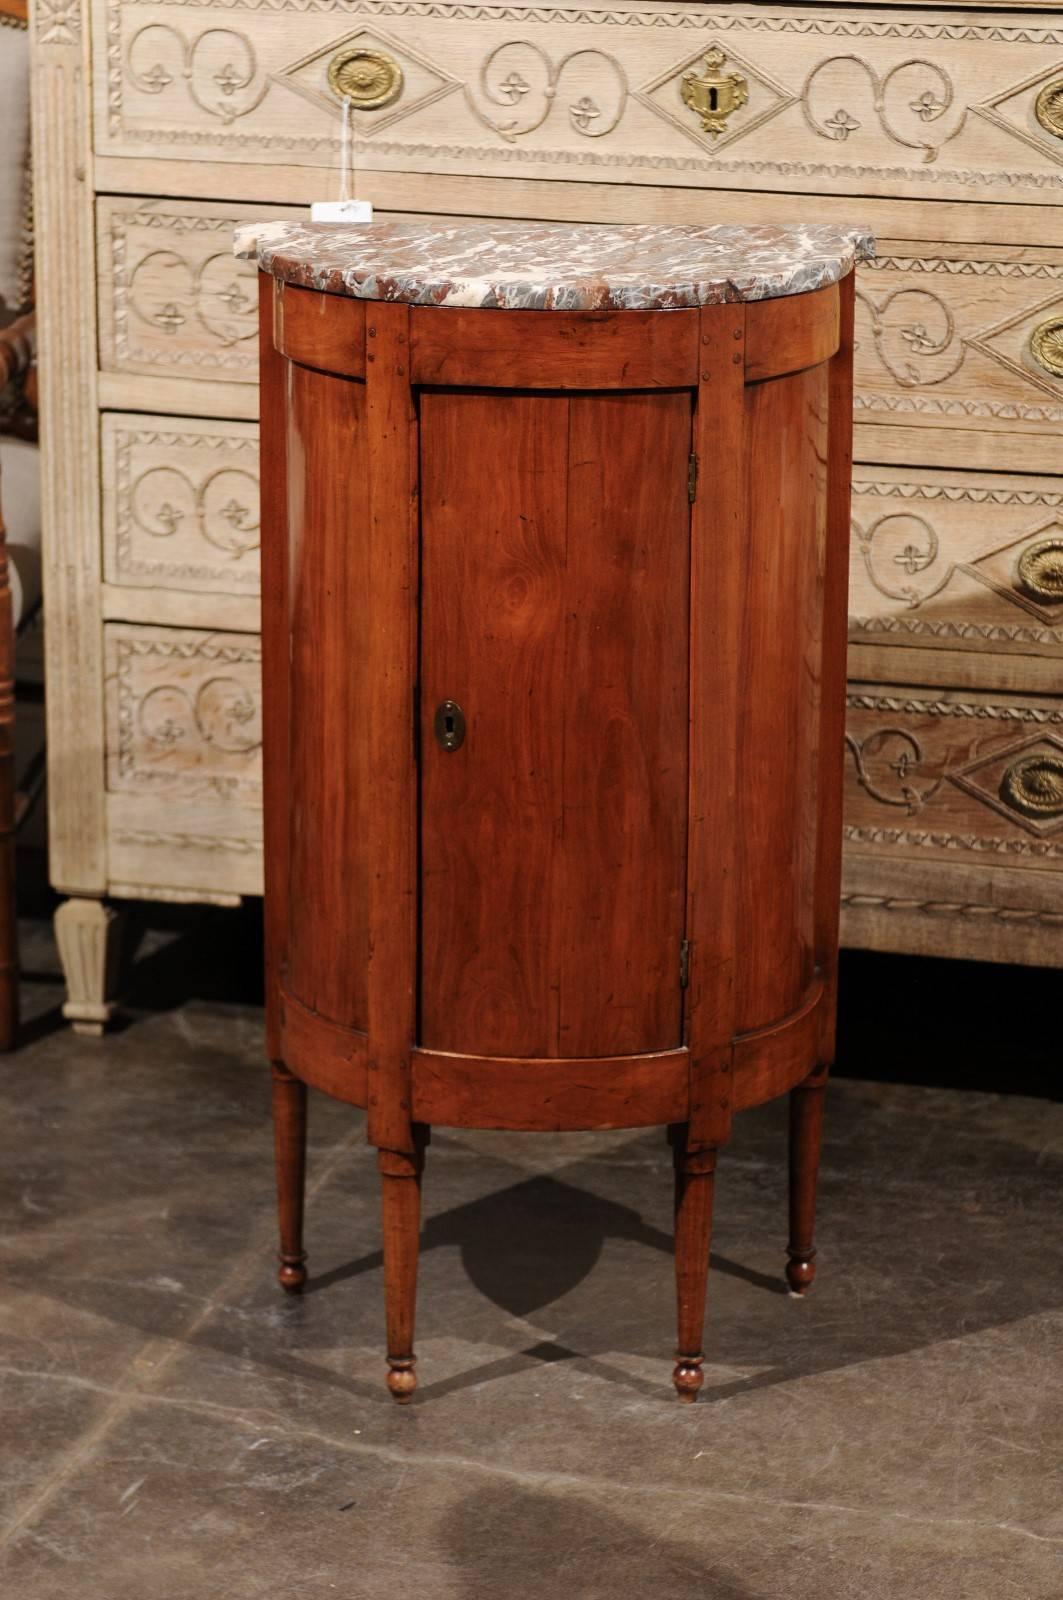 French Directoire style fruitwood demilune cabinet with marble top from the early 19th century. This exquisite French single door fruitwood cabinet features a brown and grey shaped marble-top over a pegged convex base. A single door opens to reveal